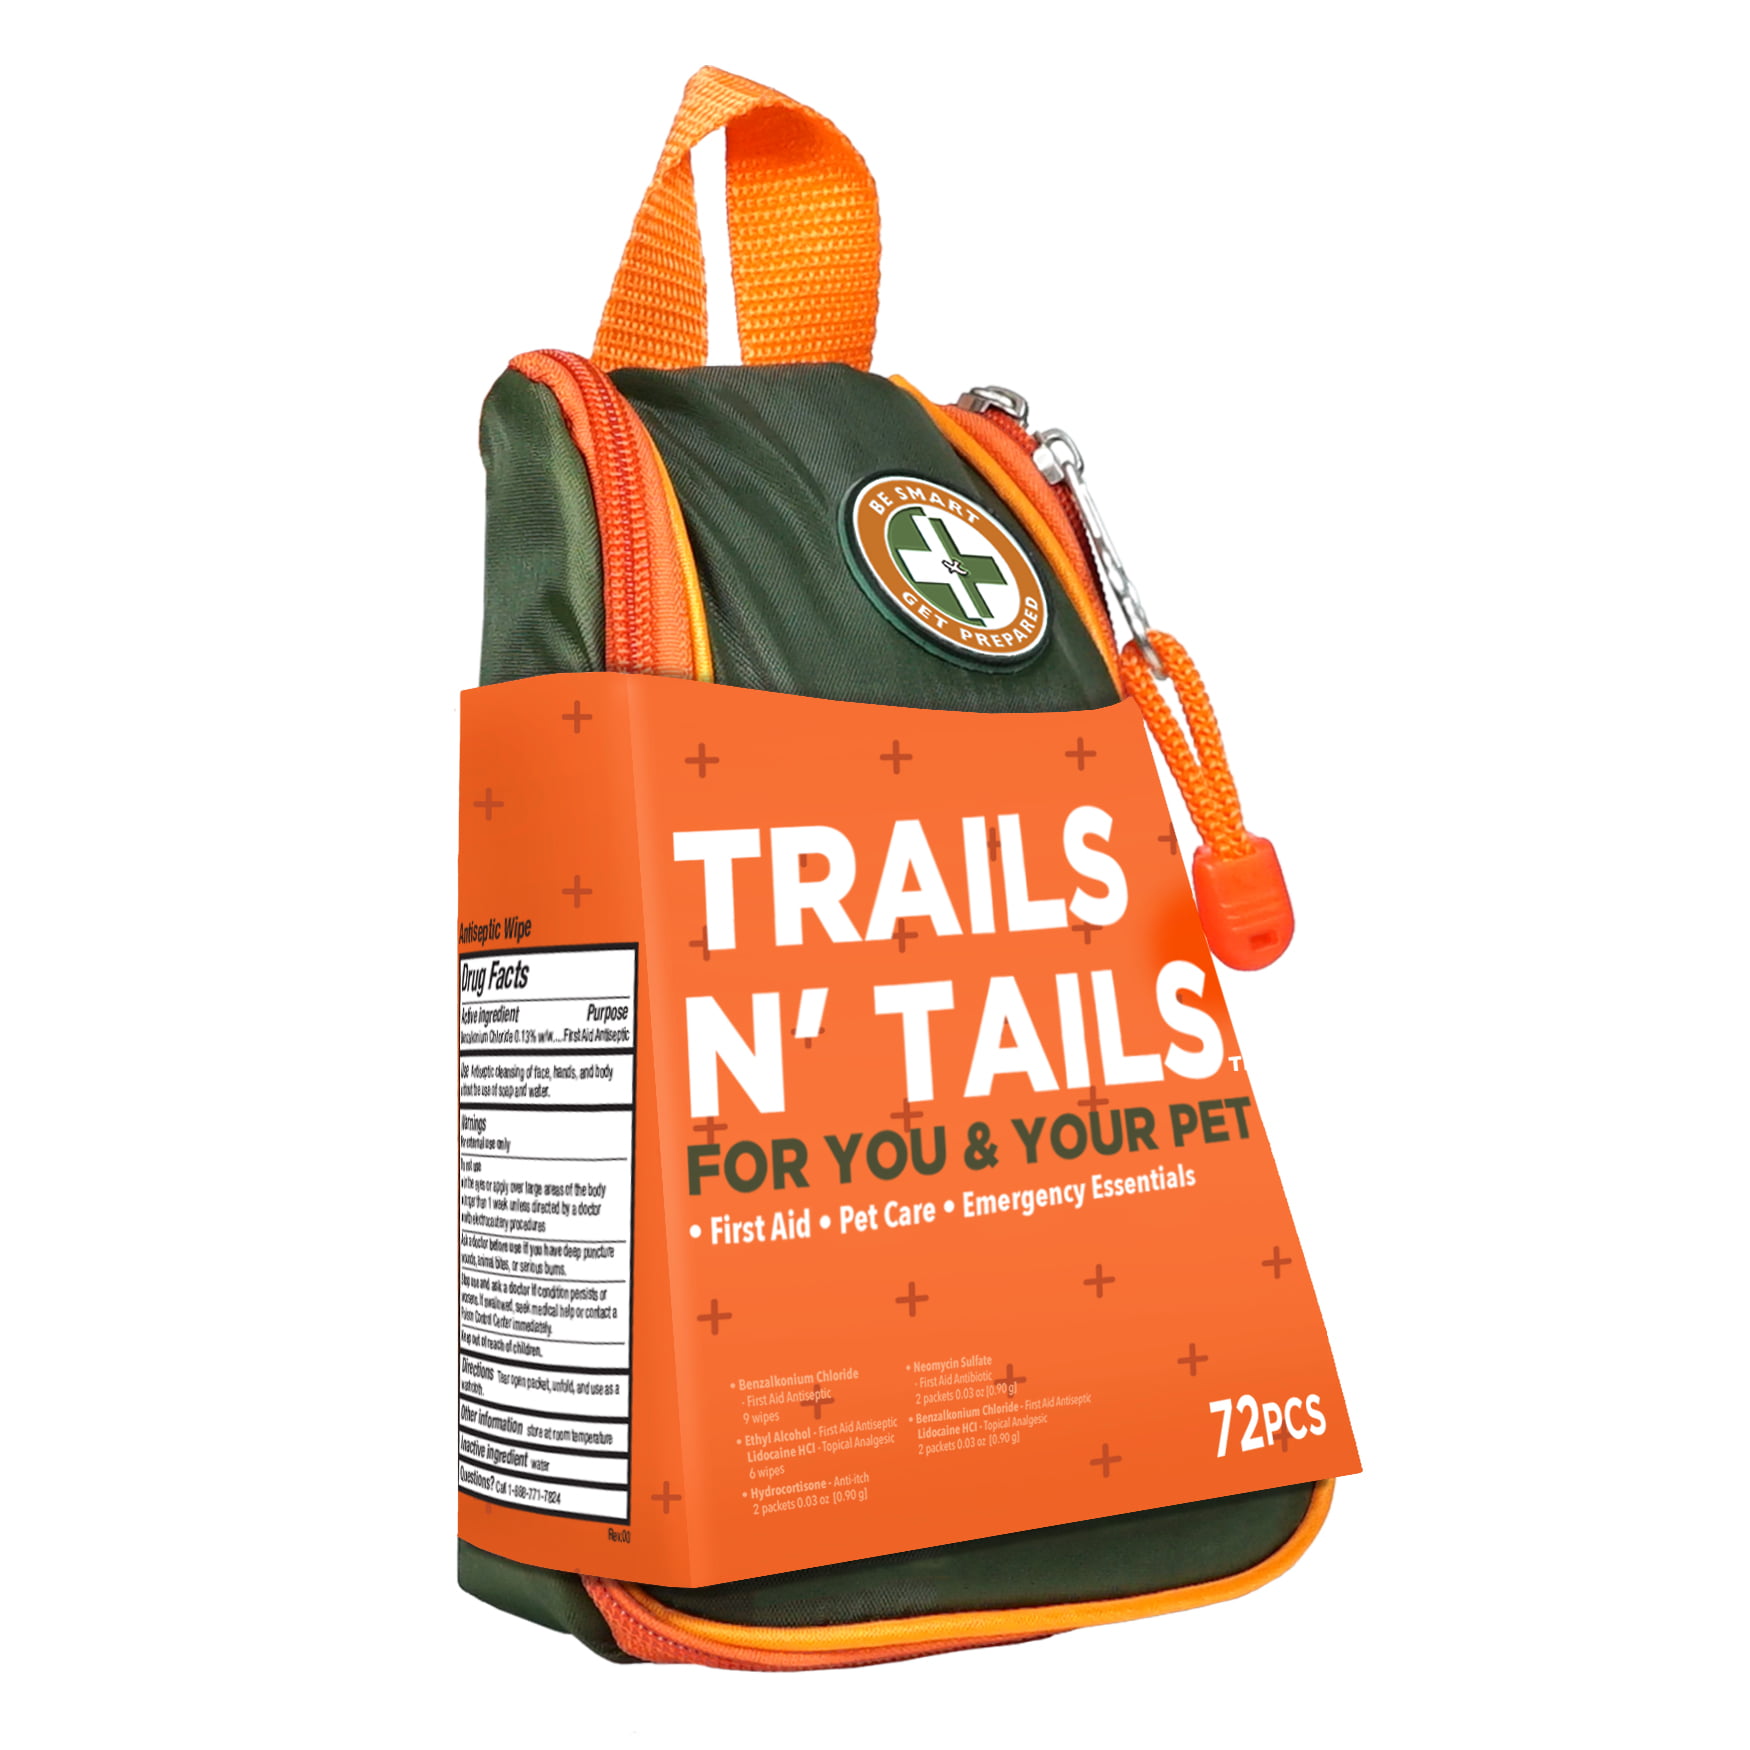 Seagull Bags' Trail Buddy keeps trailside or office essentials at